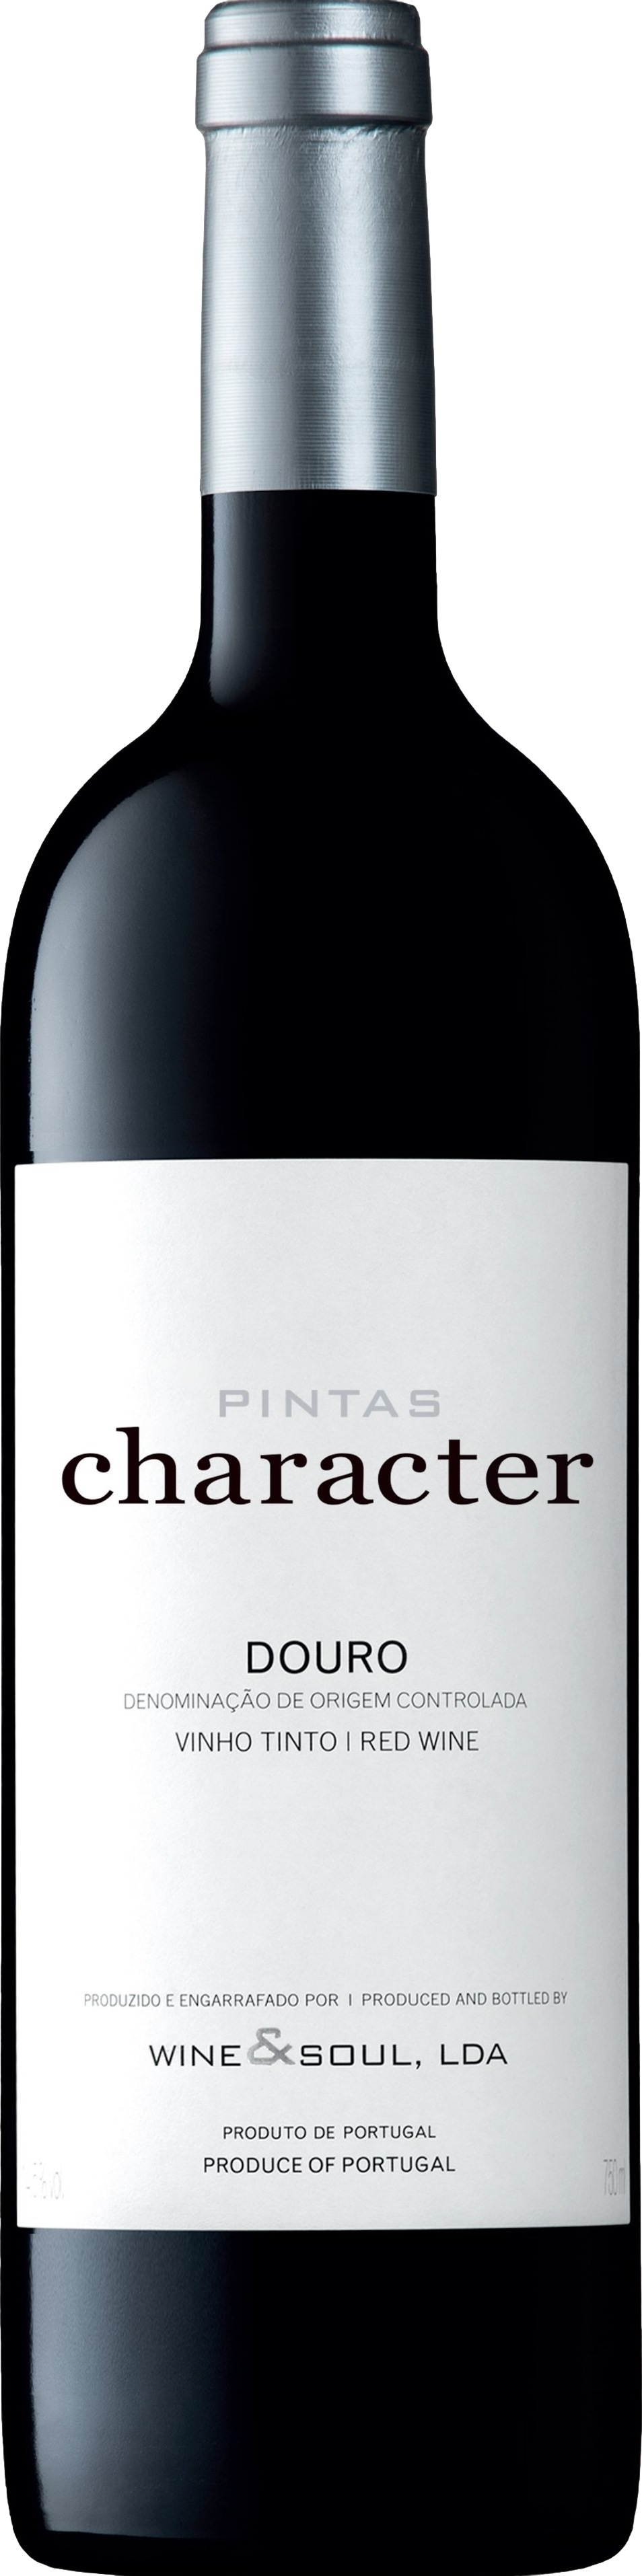 Wine & Soul Pintas Douro Character Tinto 2021 Wine & Soul 8wines DACH